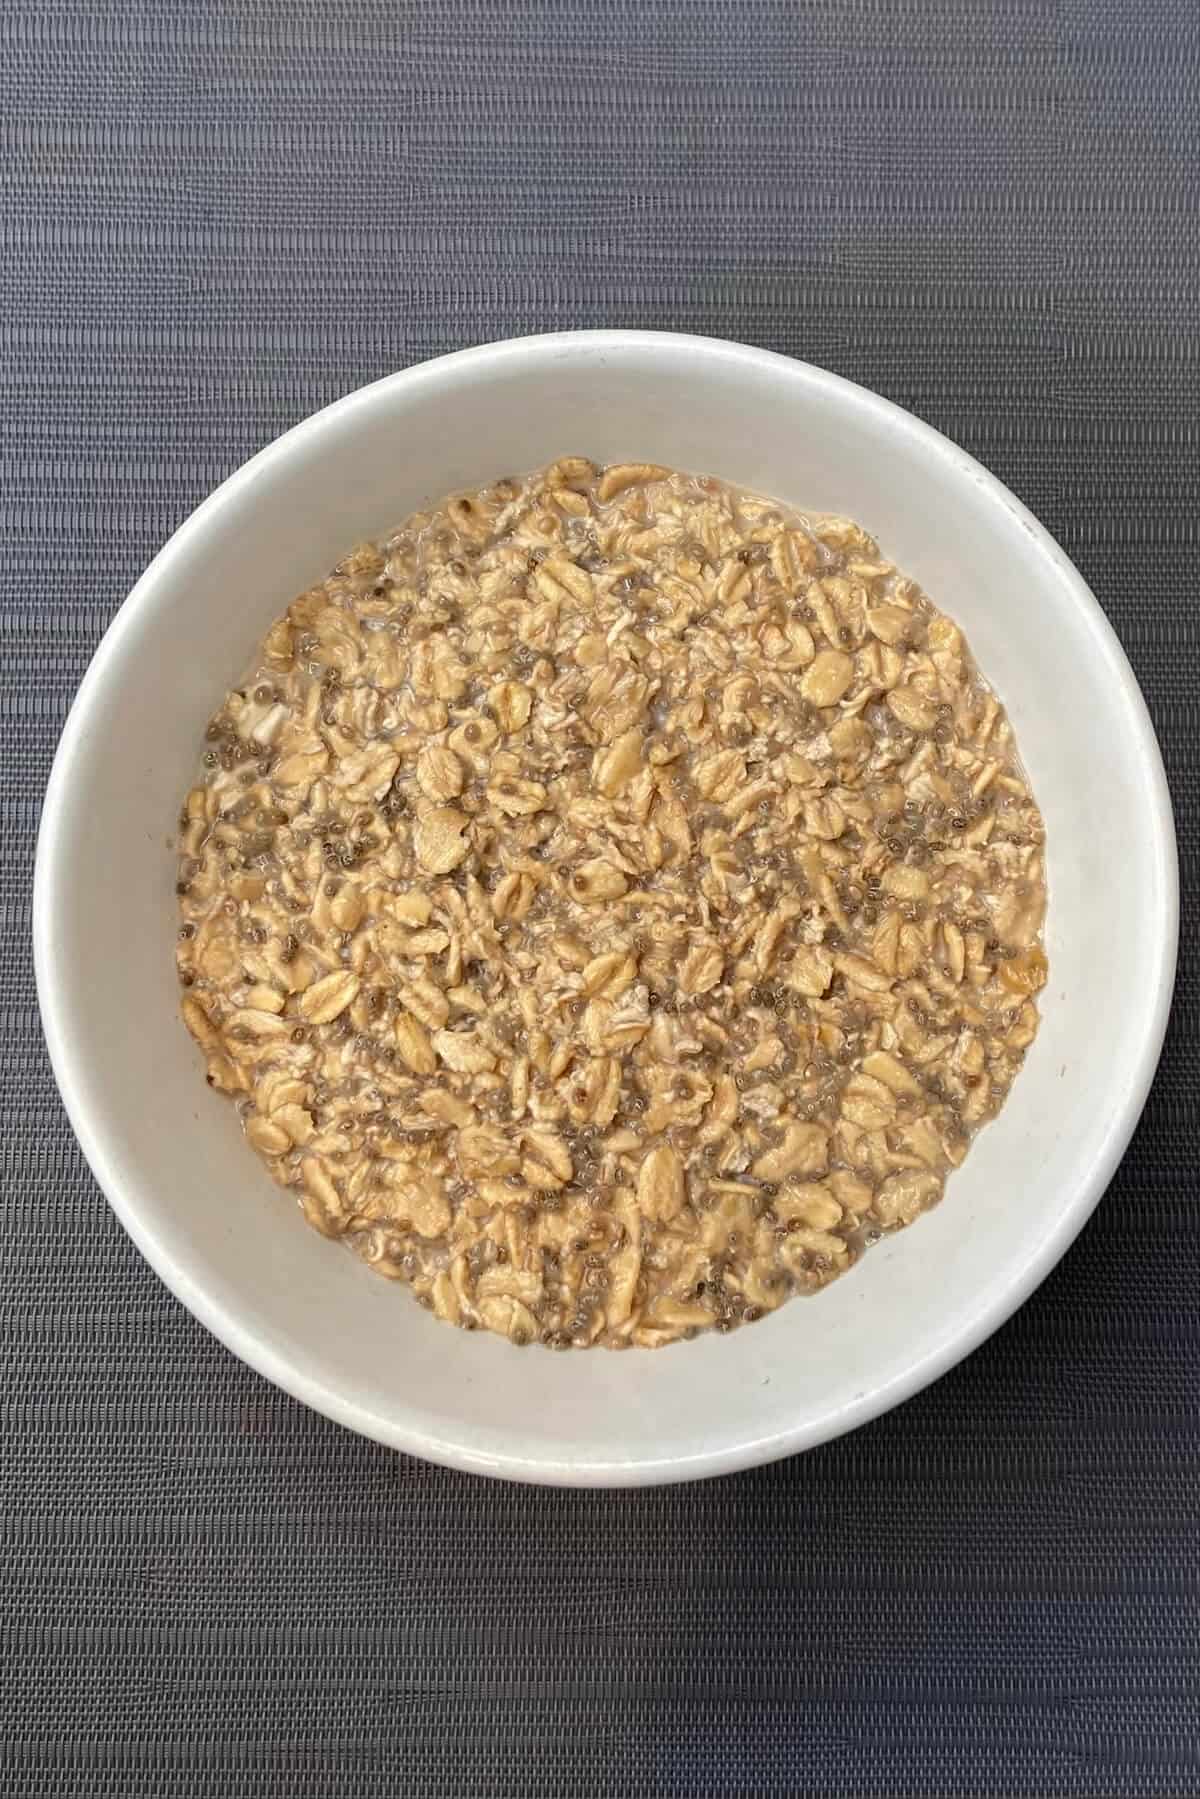 Oats in bowl after refrigeration.